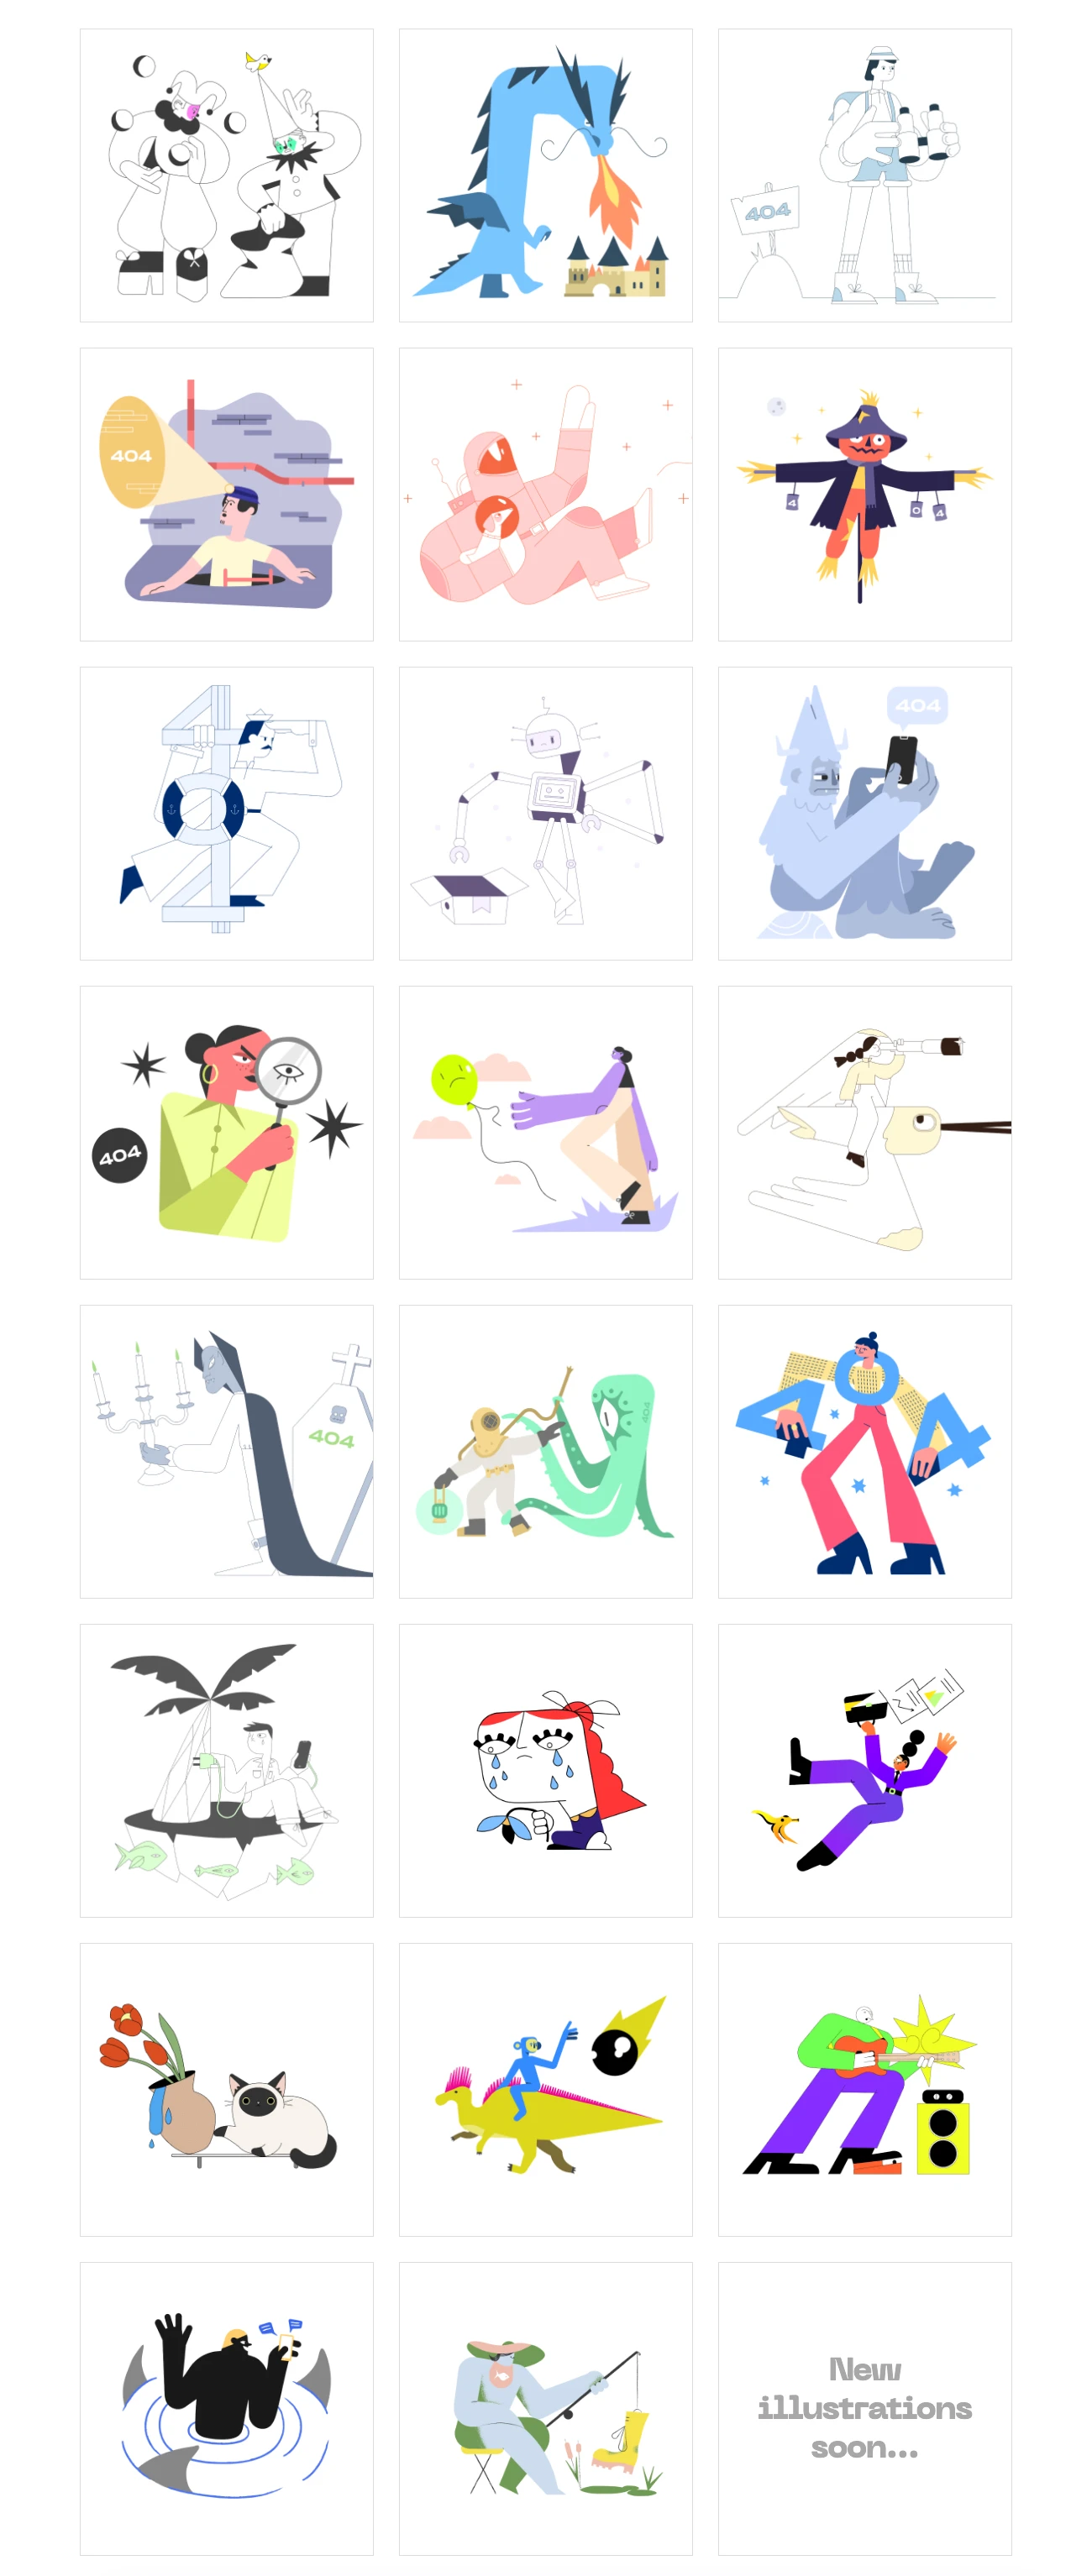 404 Illustrations for Figma & Sketch - A growing collection of open-source illustrations for your page-not-found message. Choose a scene to inform the user of the error occurred with futuristic elements and cute characters. All scenes are compatible with Sketch and Figma.